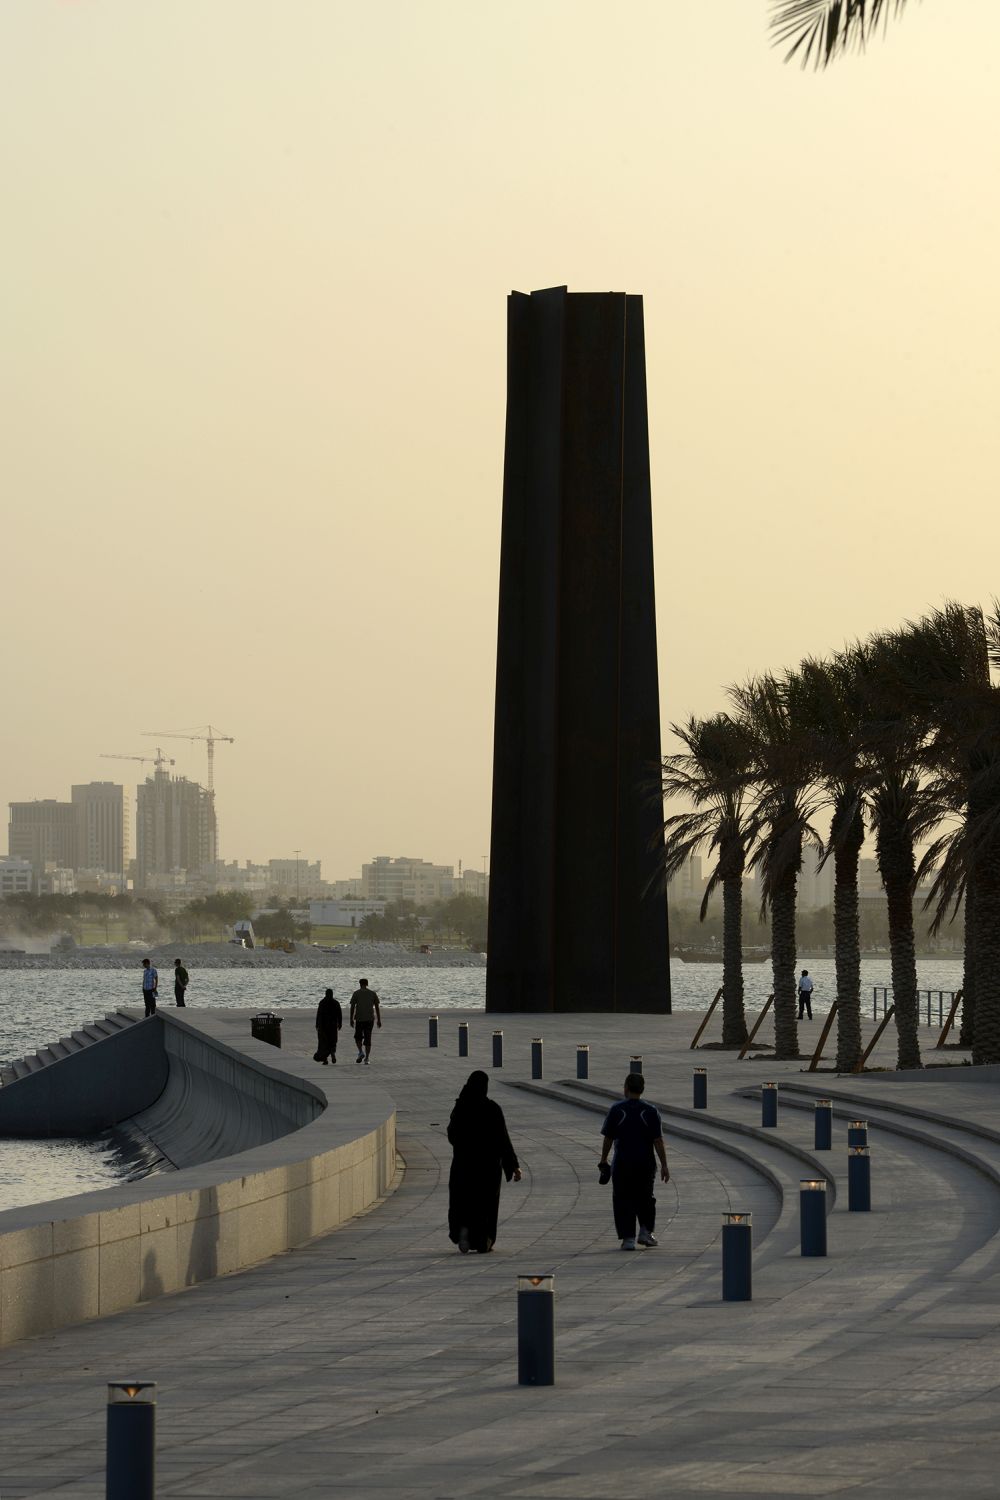 The centerpiece of the park is a monumental vertical sculpture by Richard Serra positioned as a beacon at the tip of park 